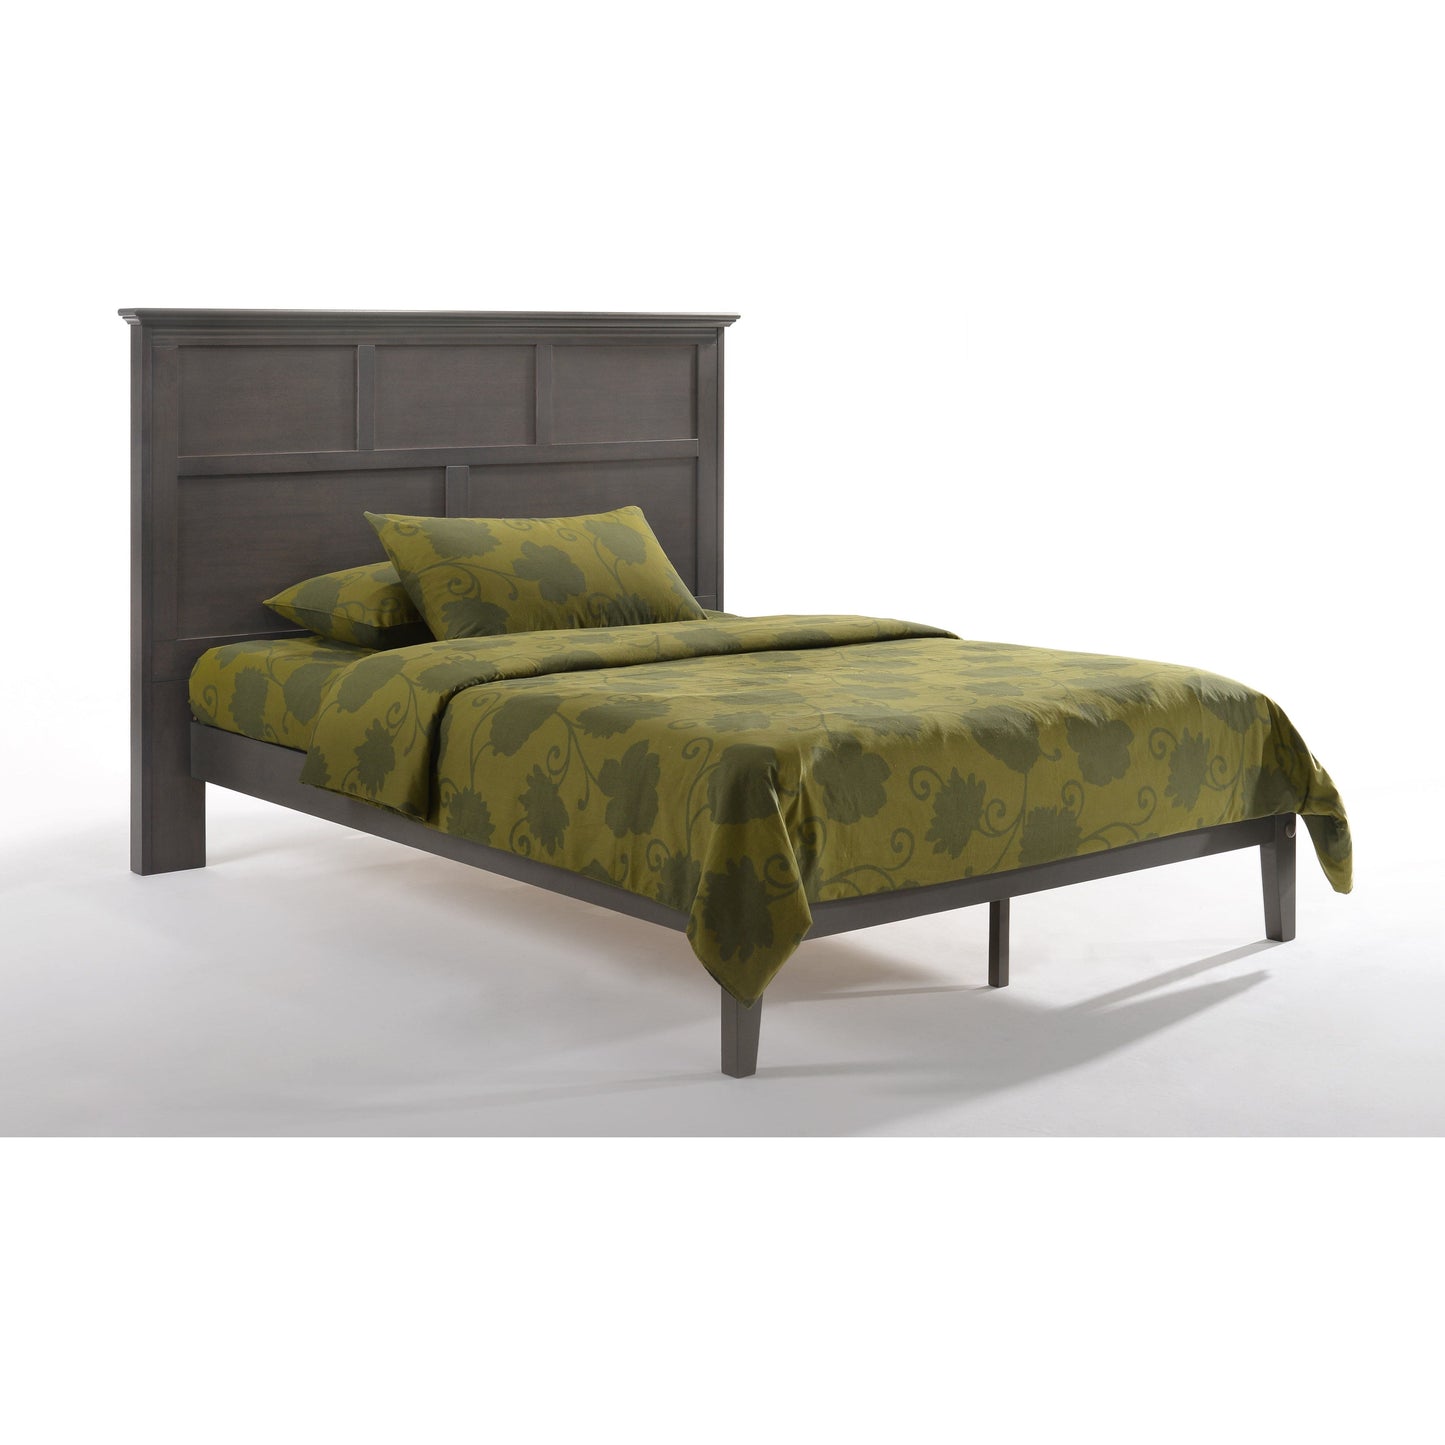 Night And Day King Tarragon Bed Frame (P Series) in cherry finish